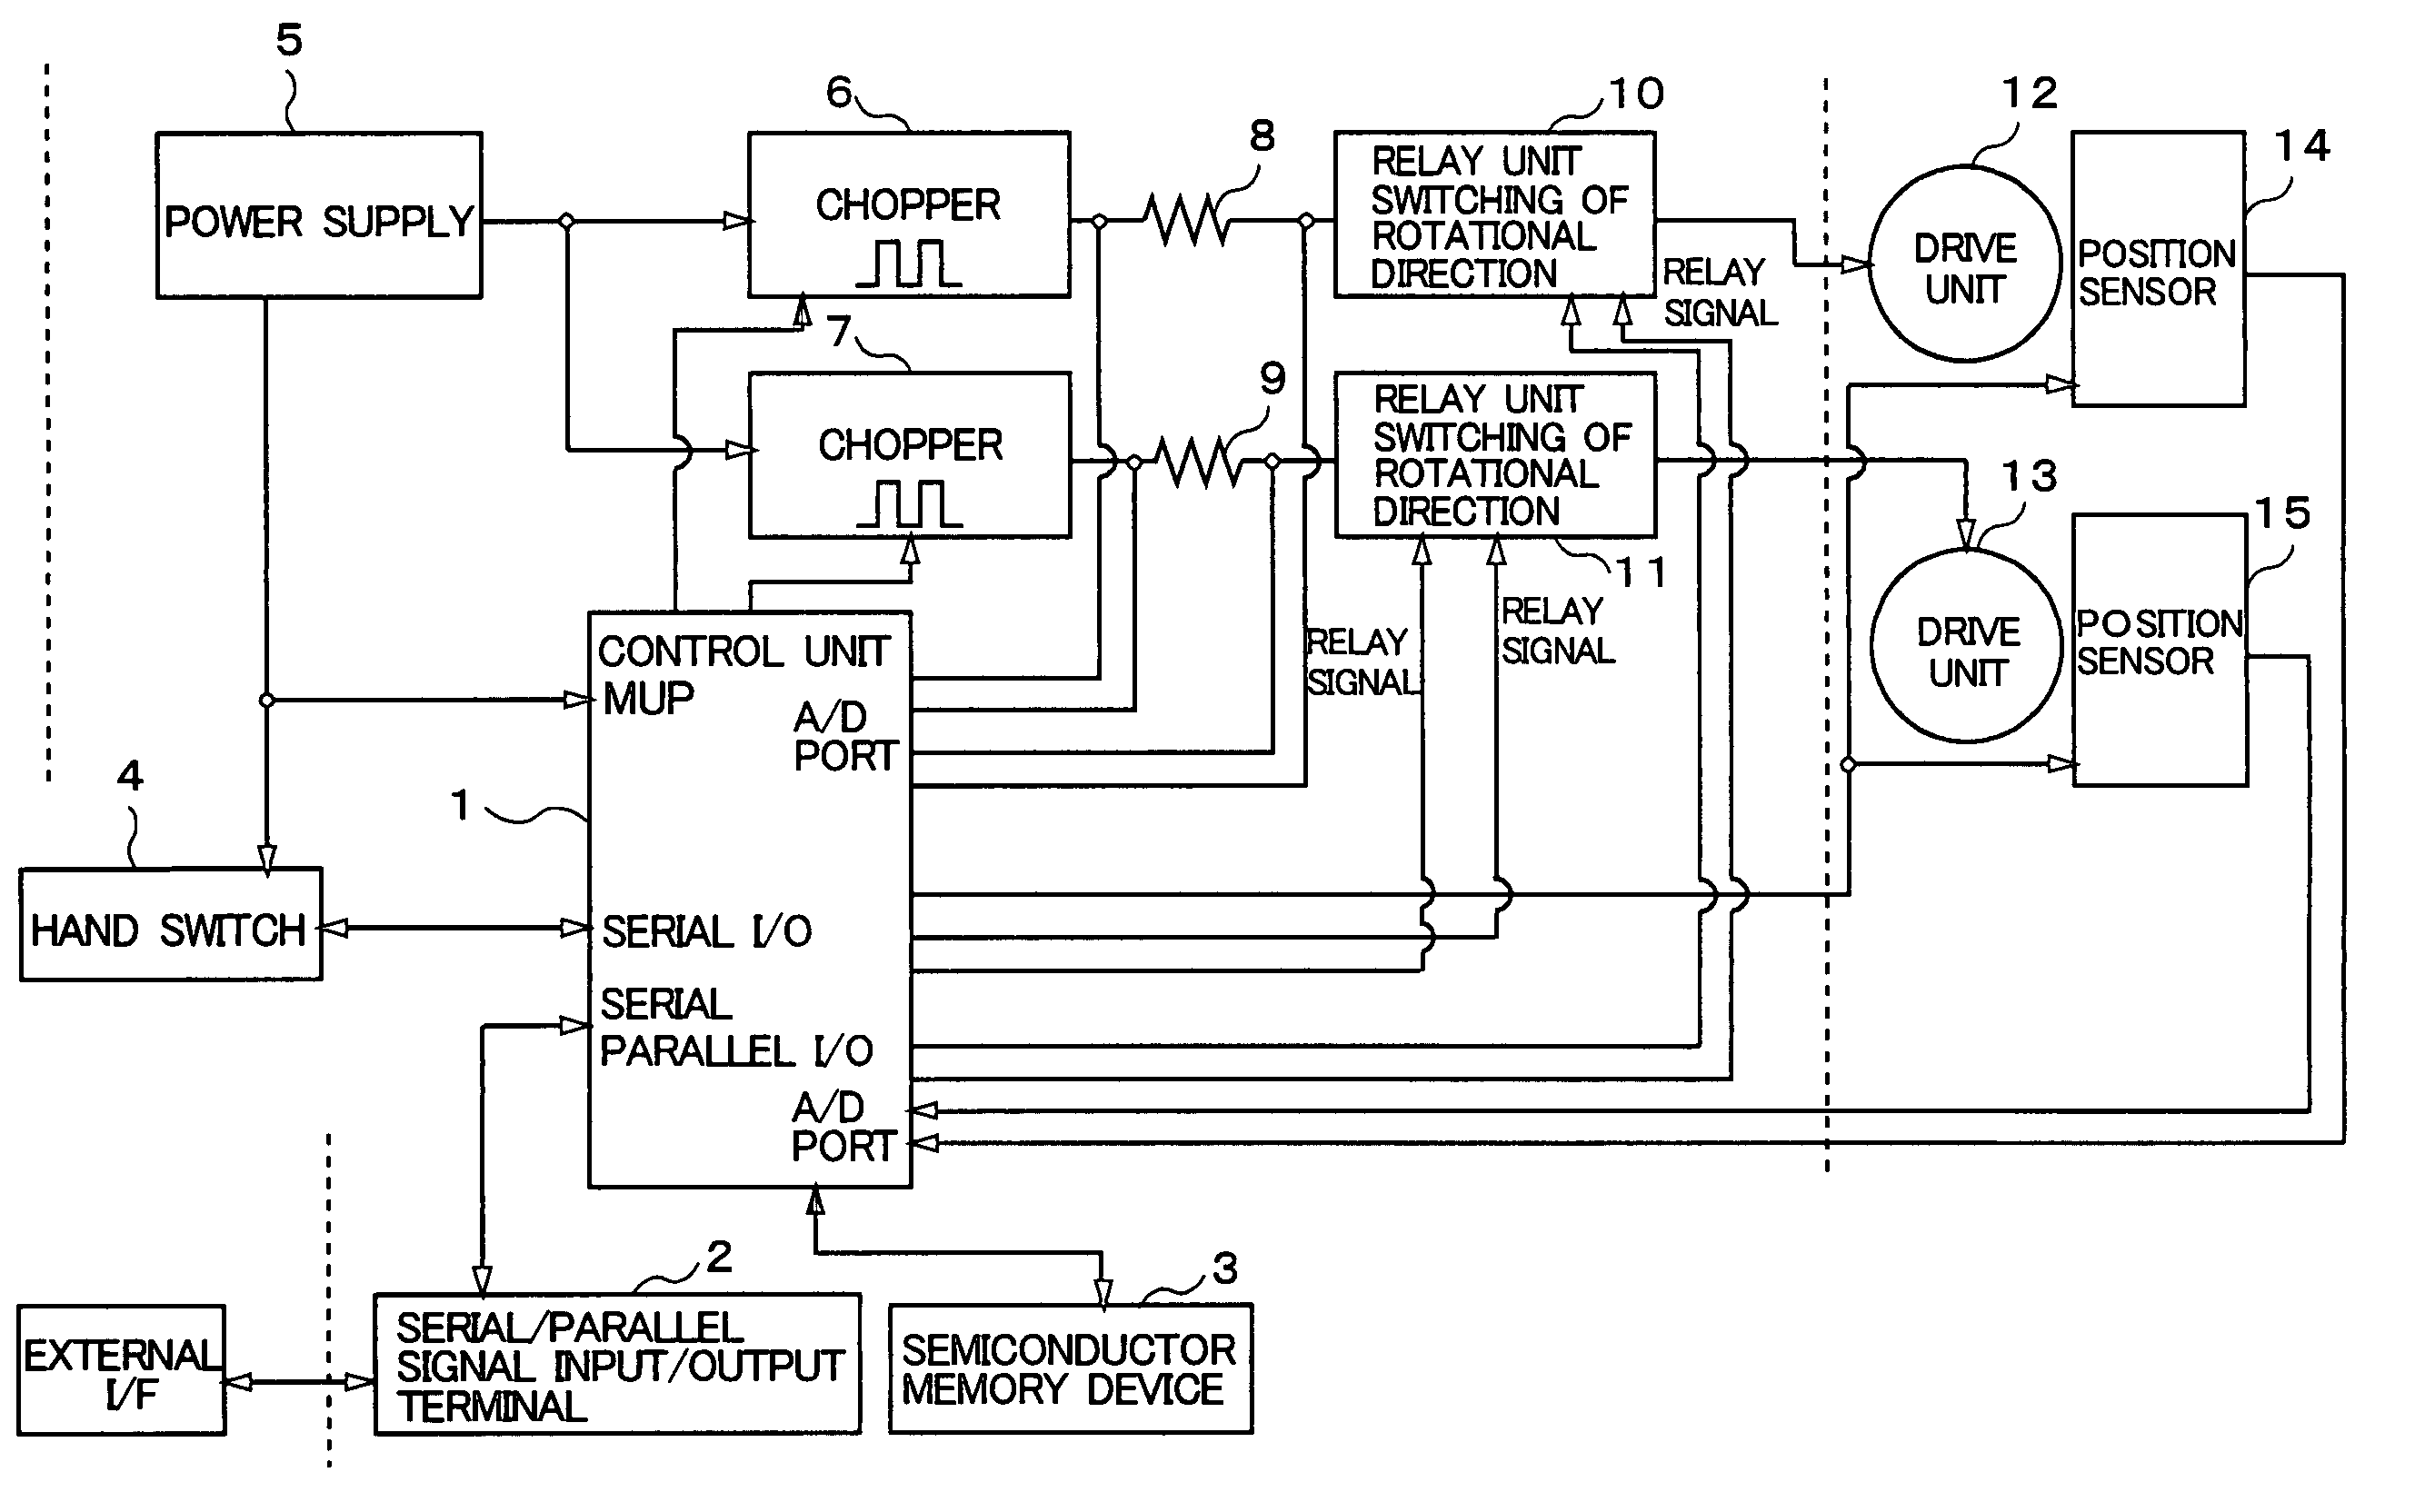 Operation control apparatus for electric bed